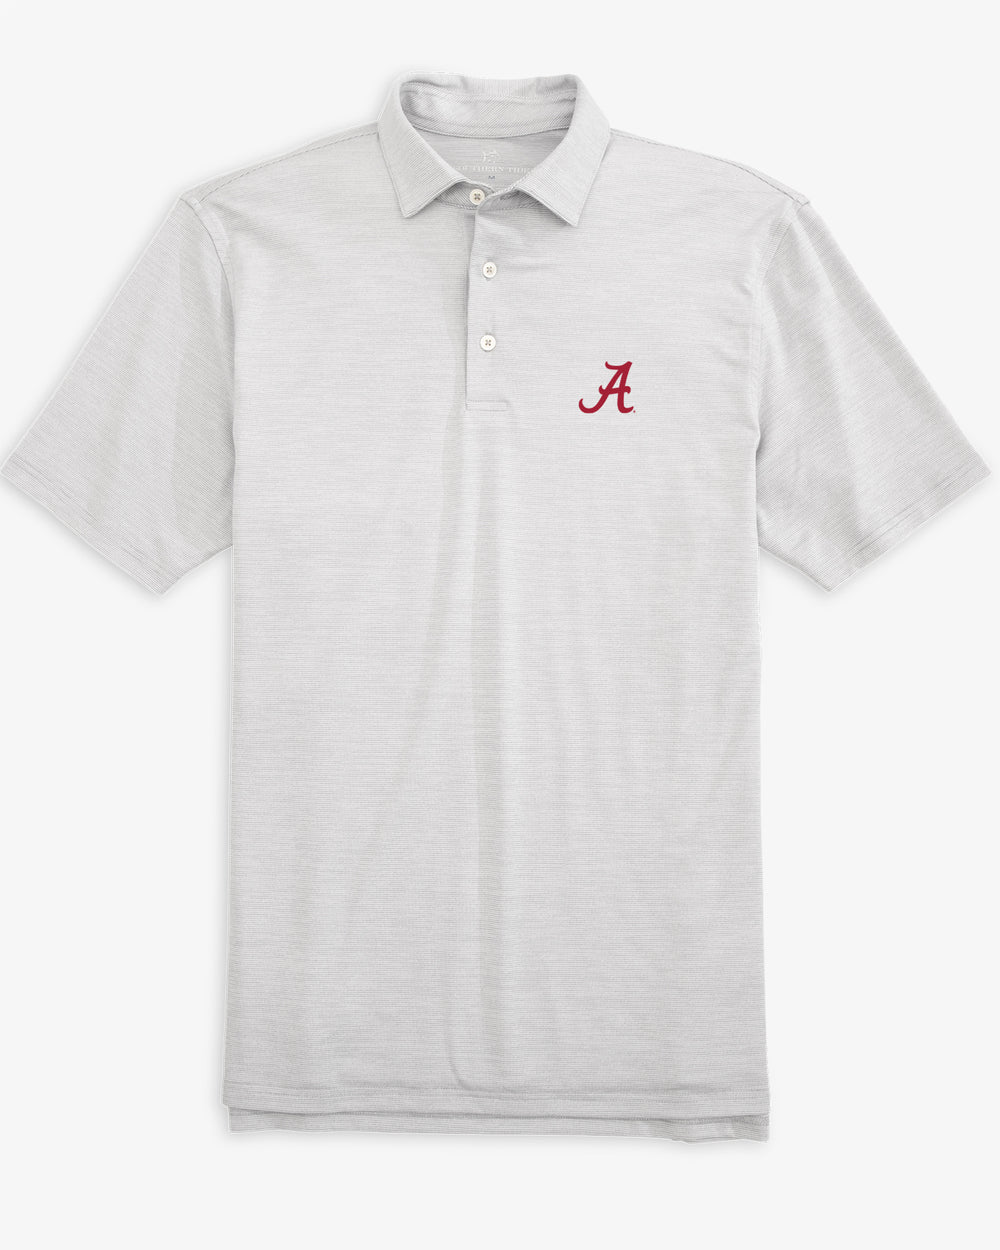 The front of the Alabama Crimson Tide Driver Spacedye Polo Shirt by Southern Tide - Slate Grey